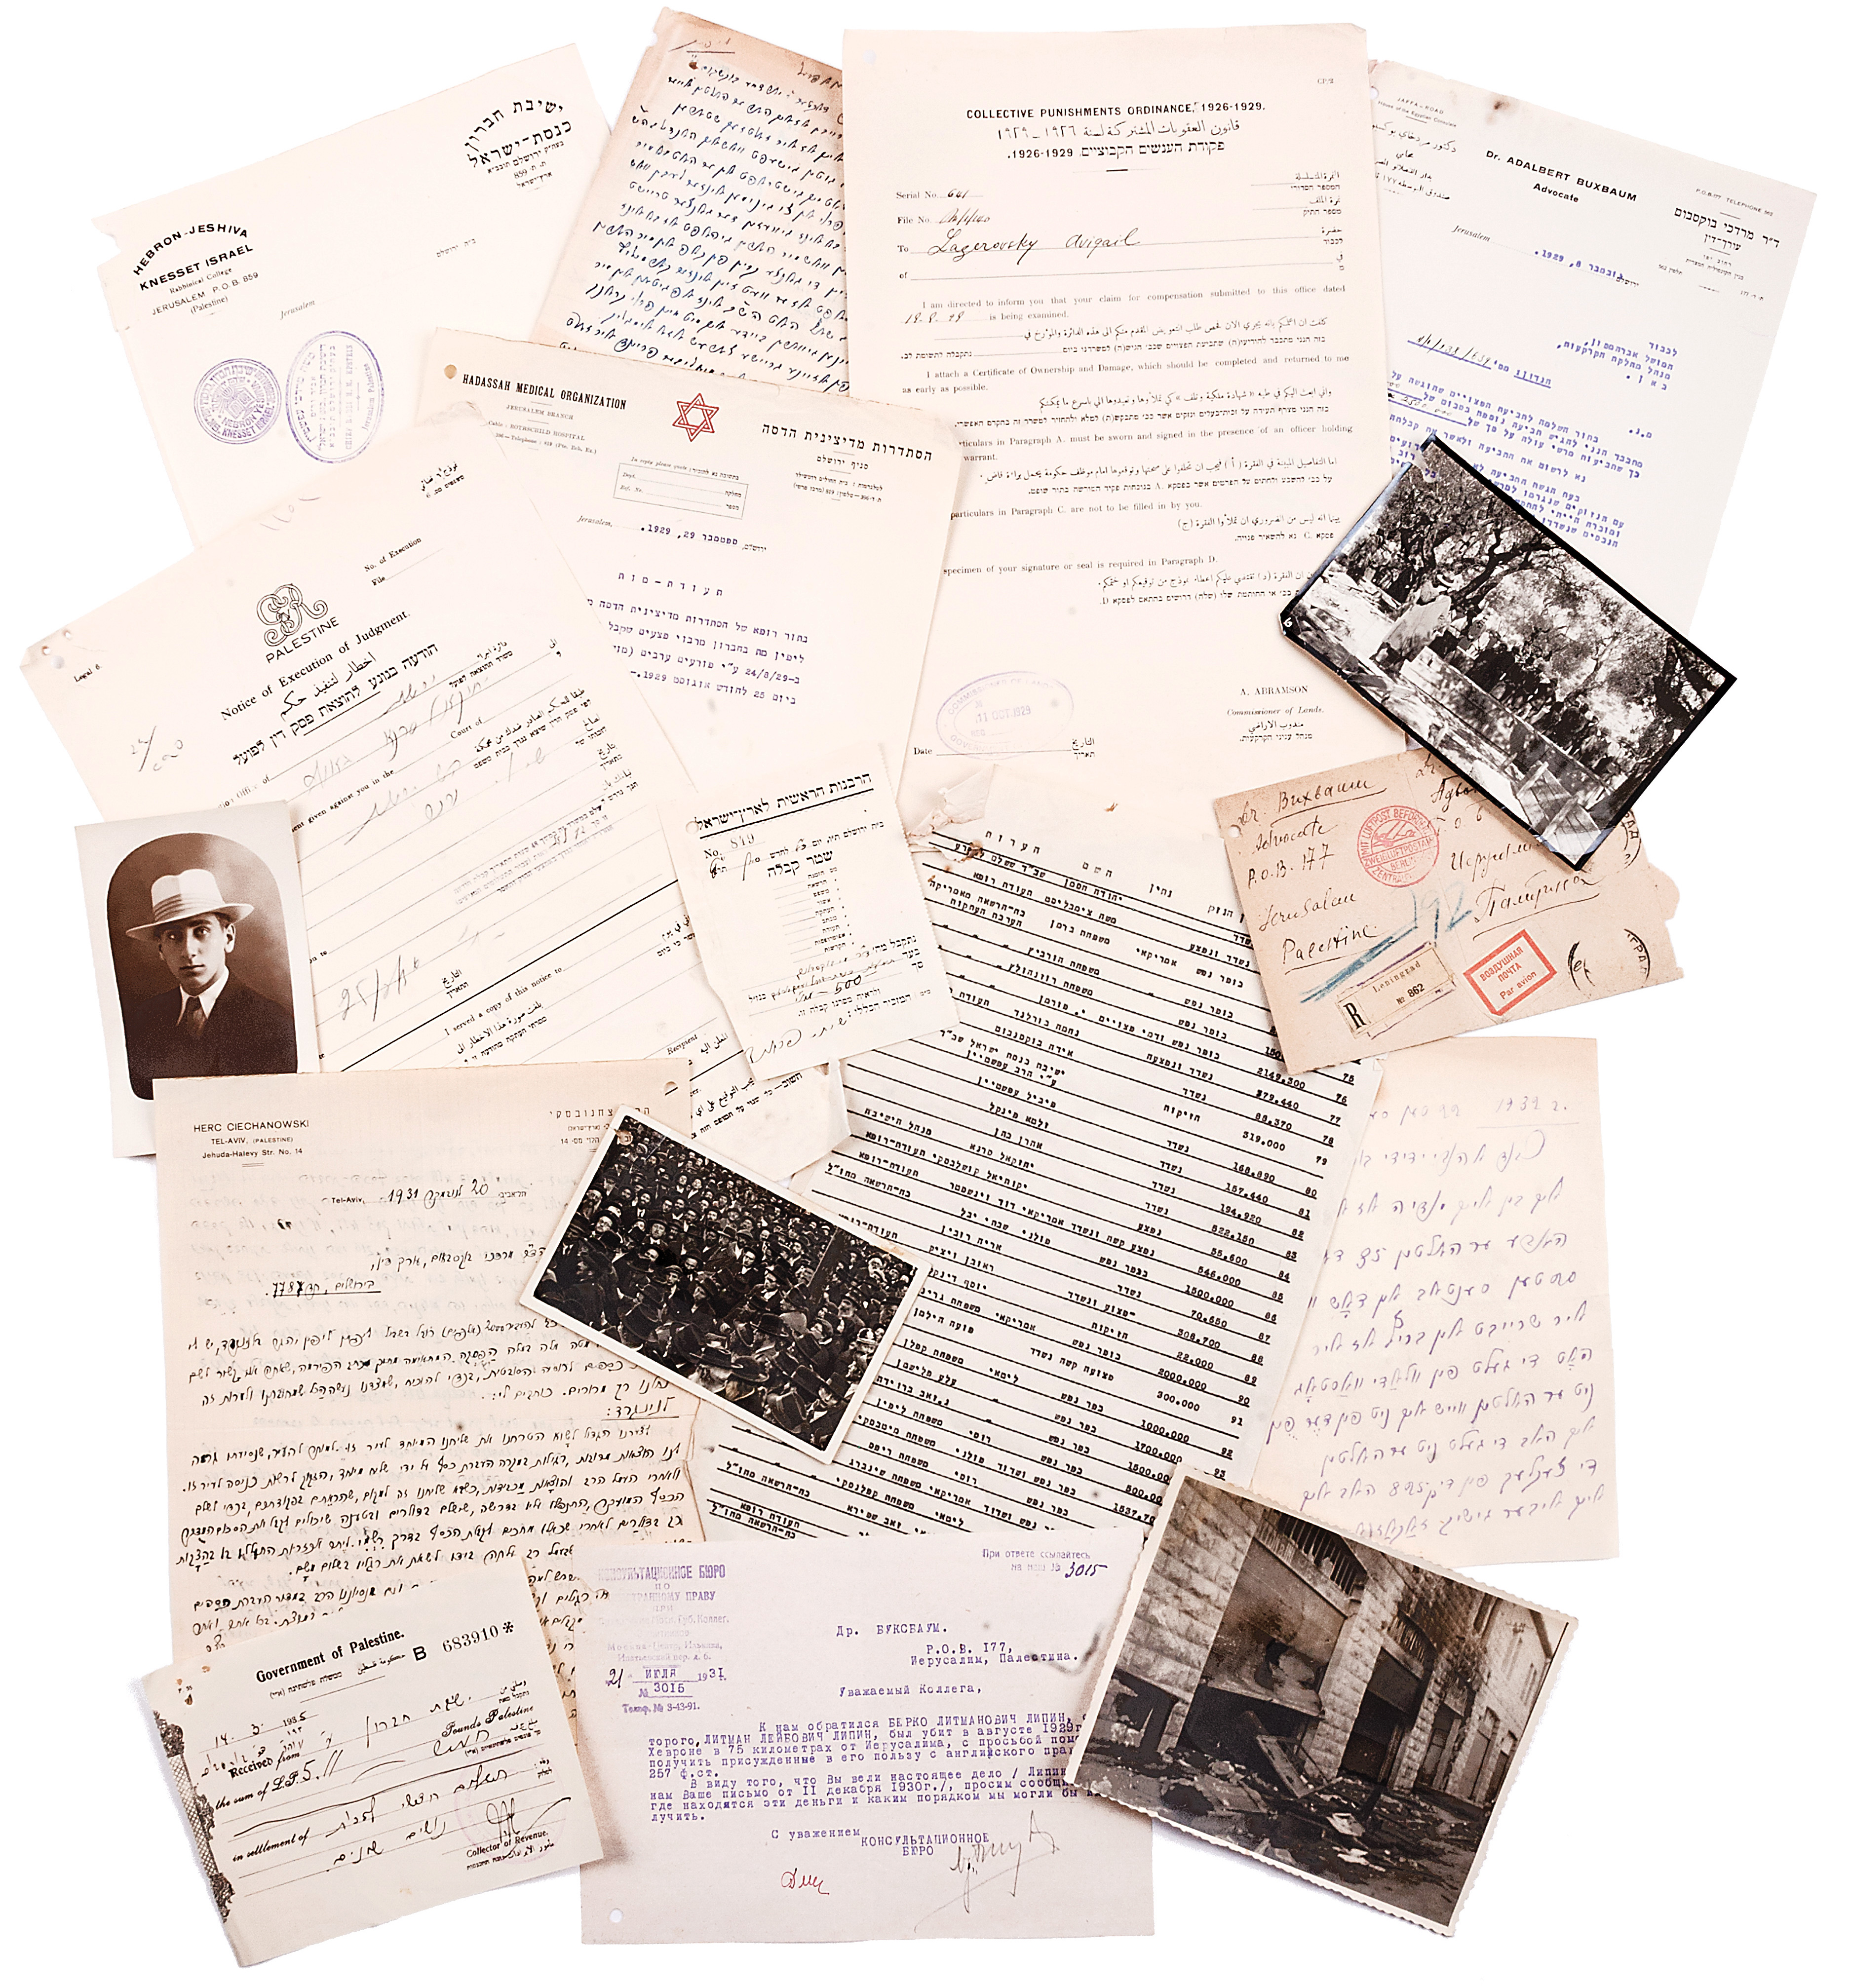 <p>Extensive archive of documents relating to the Hebron Massacre of August, 1929.</p>
<p>Sold at auction 25th June, 2015.</p>
<p>Hammer-price: $36,000.</p>